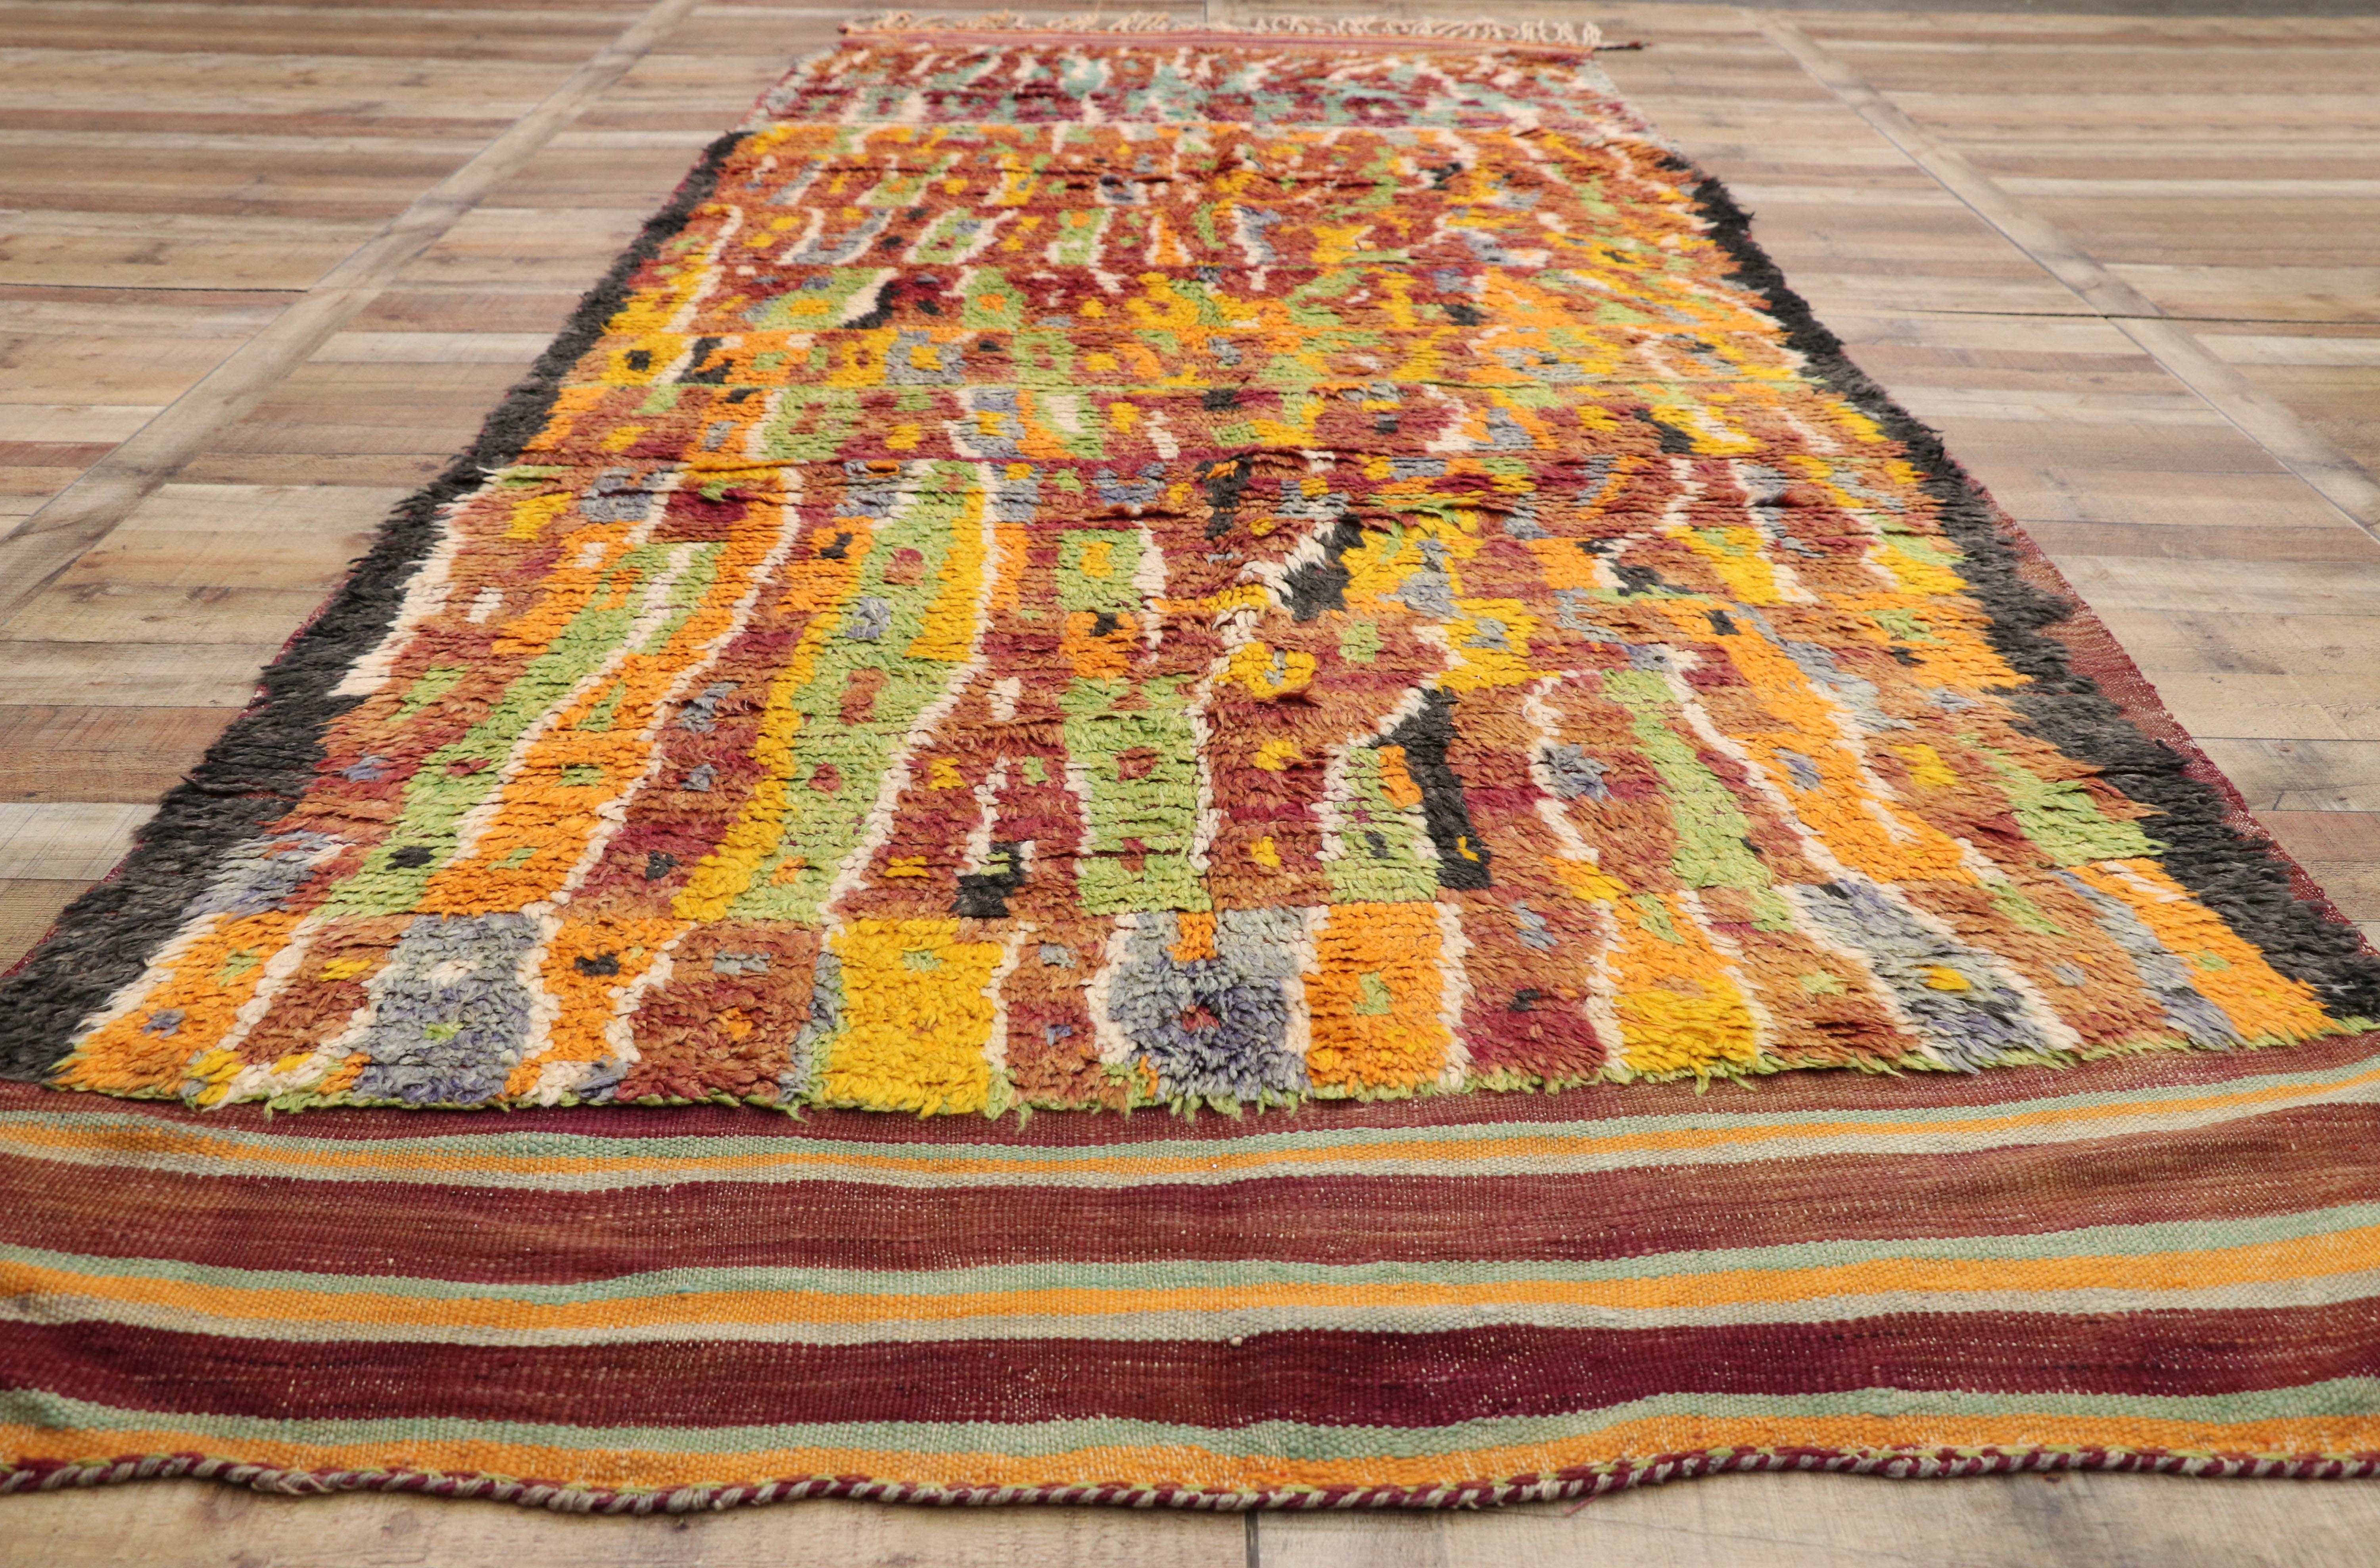 Vintage Berber Ait Bou Ichaouen Moroccan Rug with Abstract Expressionist Style For Sale 1